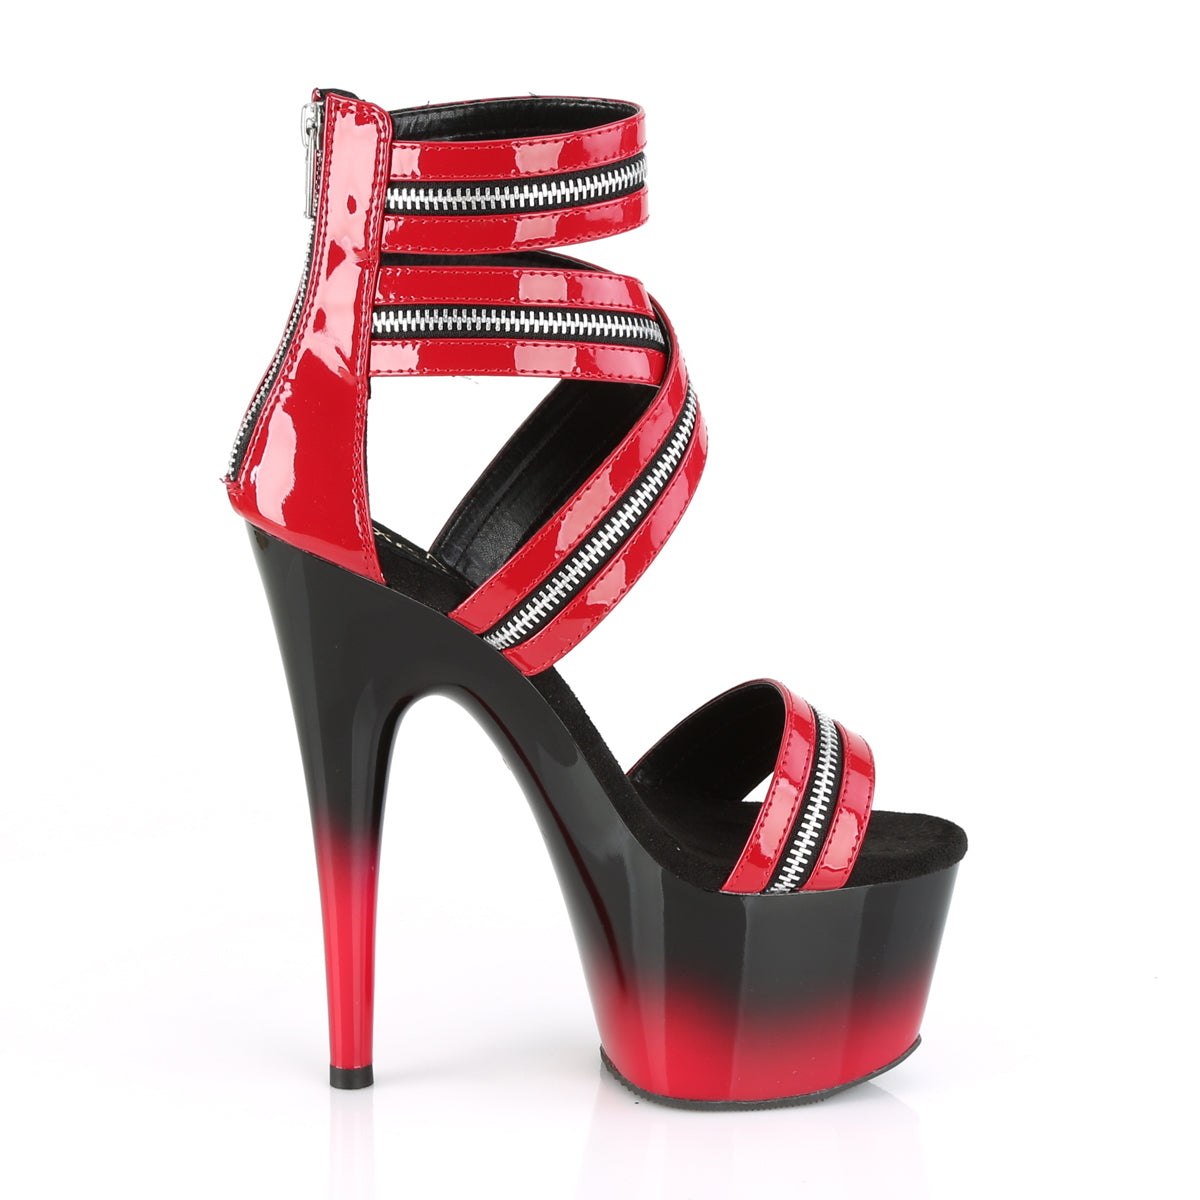 Pleaser Womens Sandals ADORE-766 Red Pat/Blk-Red